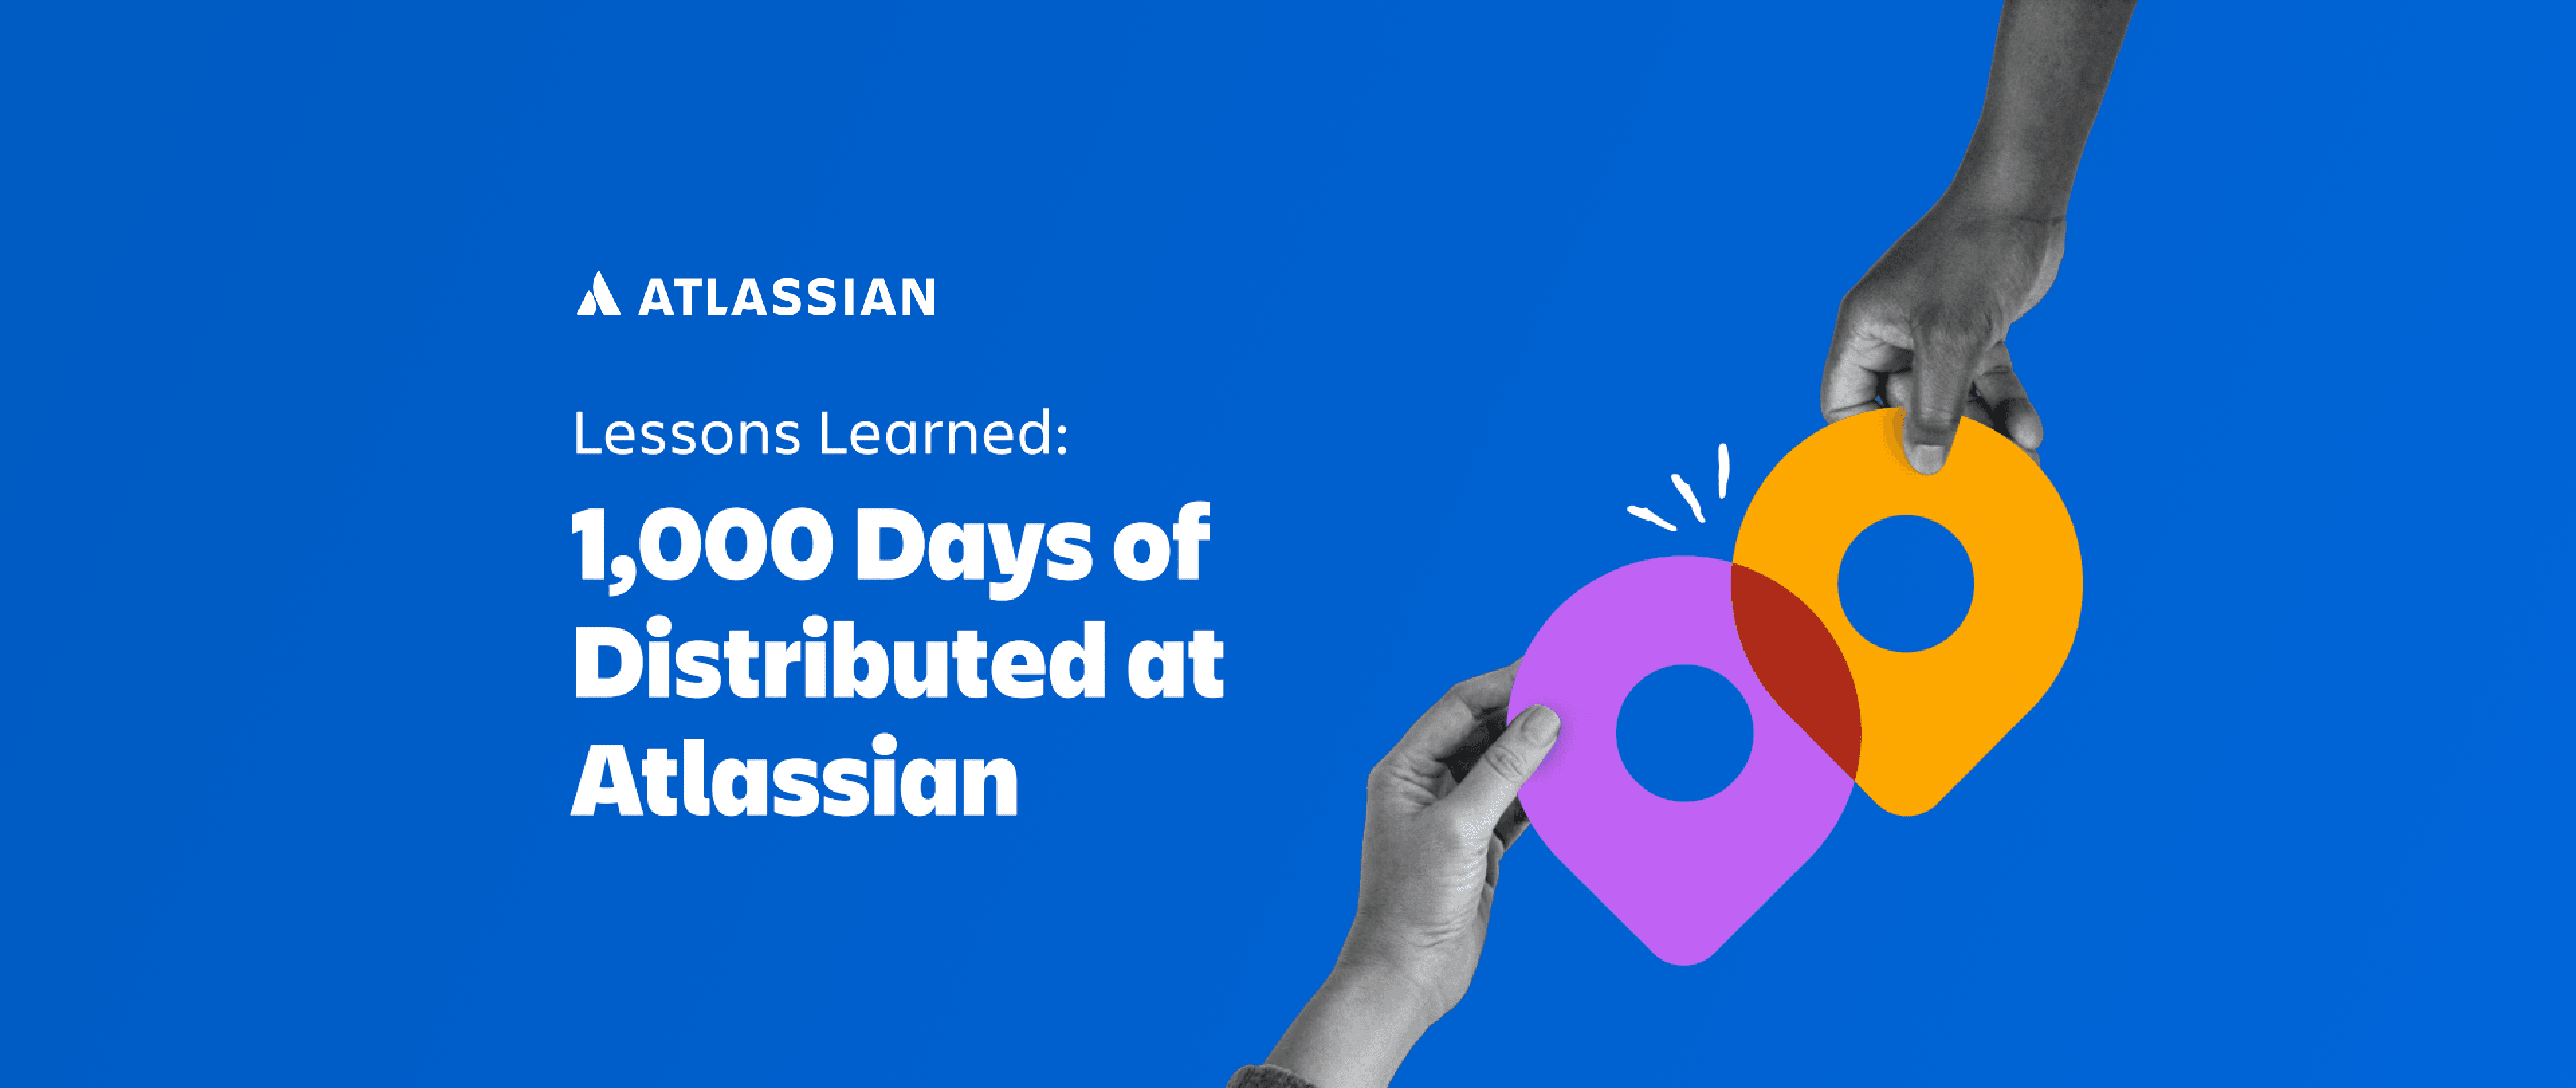 Takeaways From The Atlassian 1,000 Days of Distributed Report